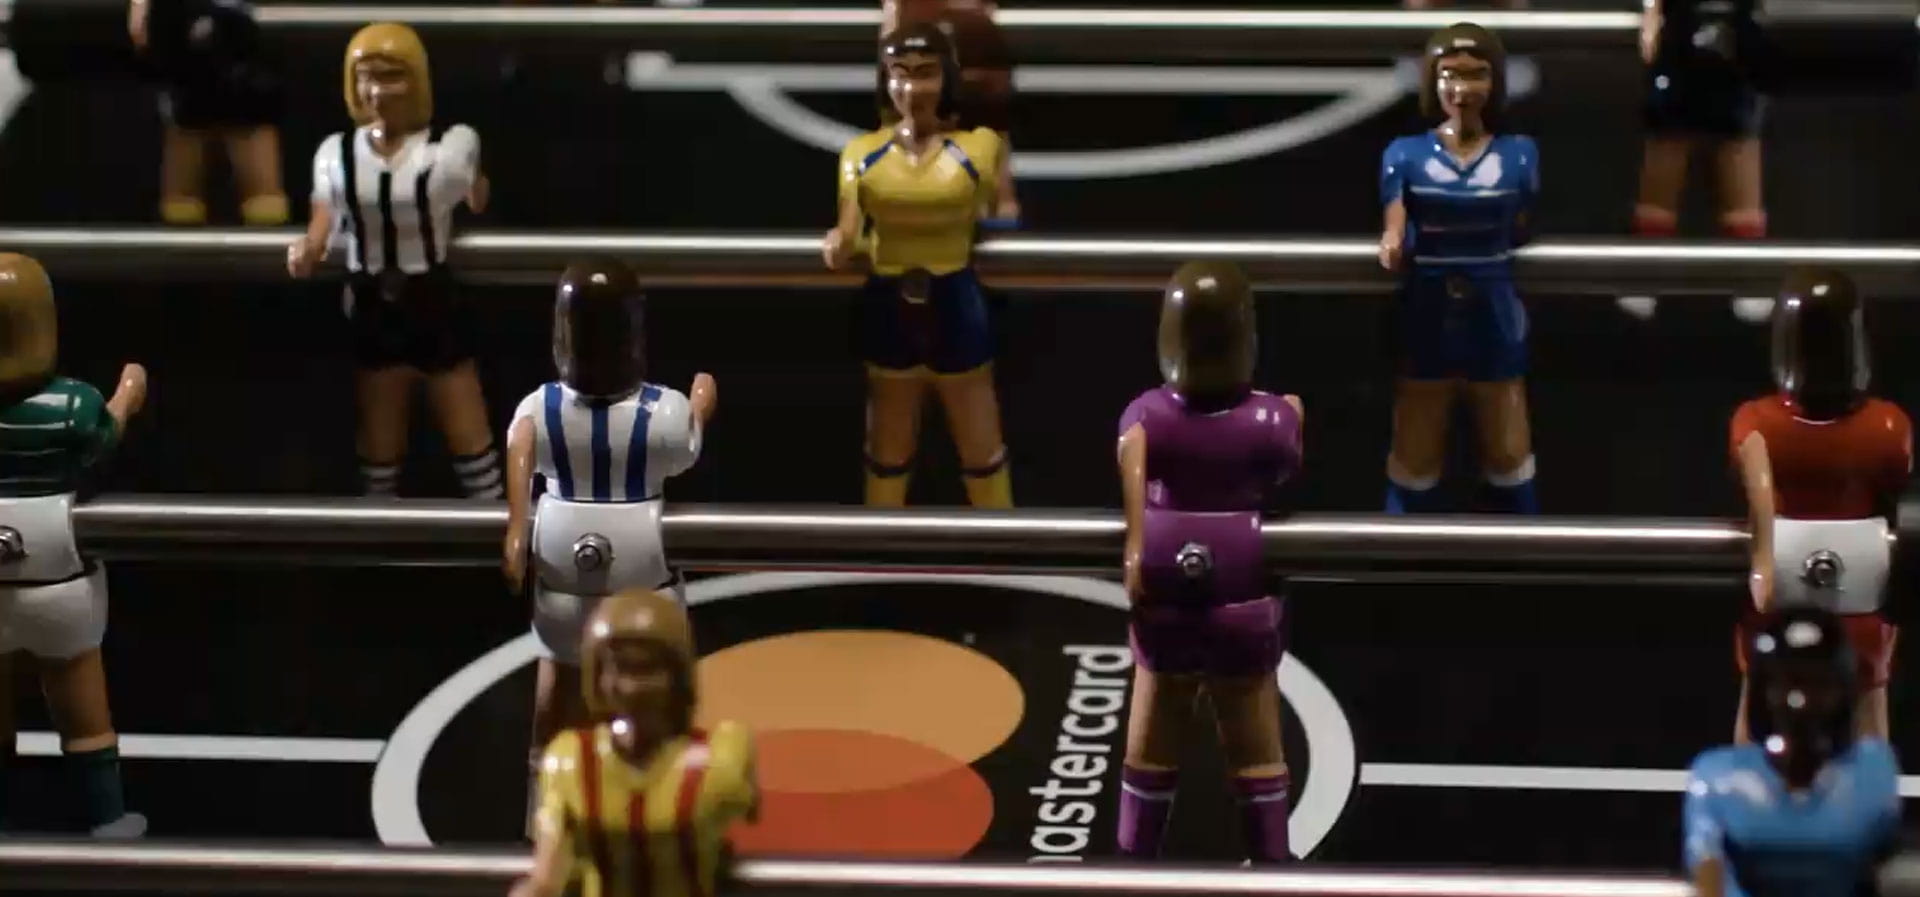 RS Barcelona customise a football table for Mastercard commercial